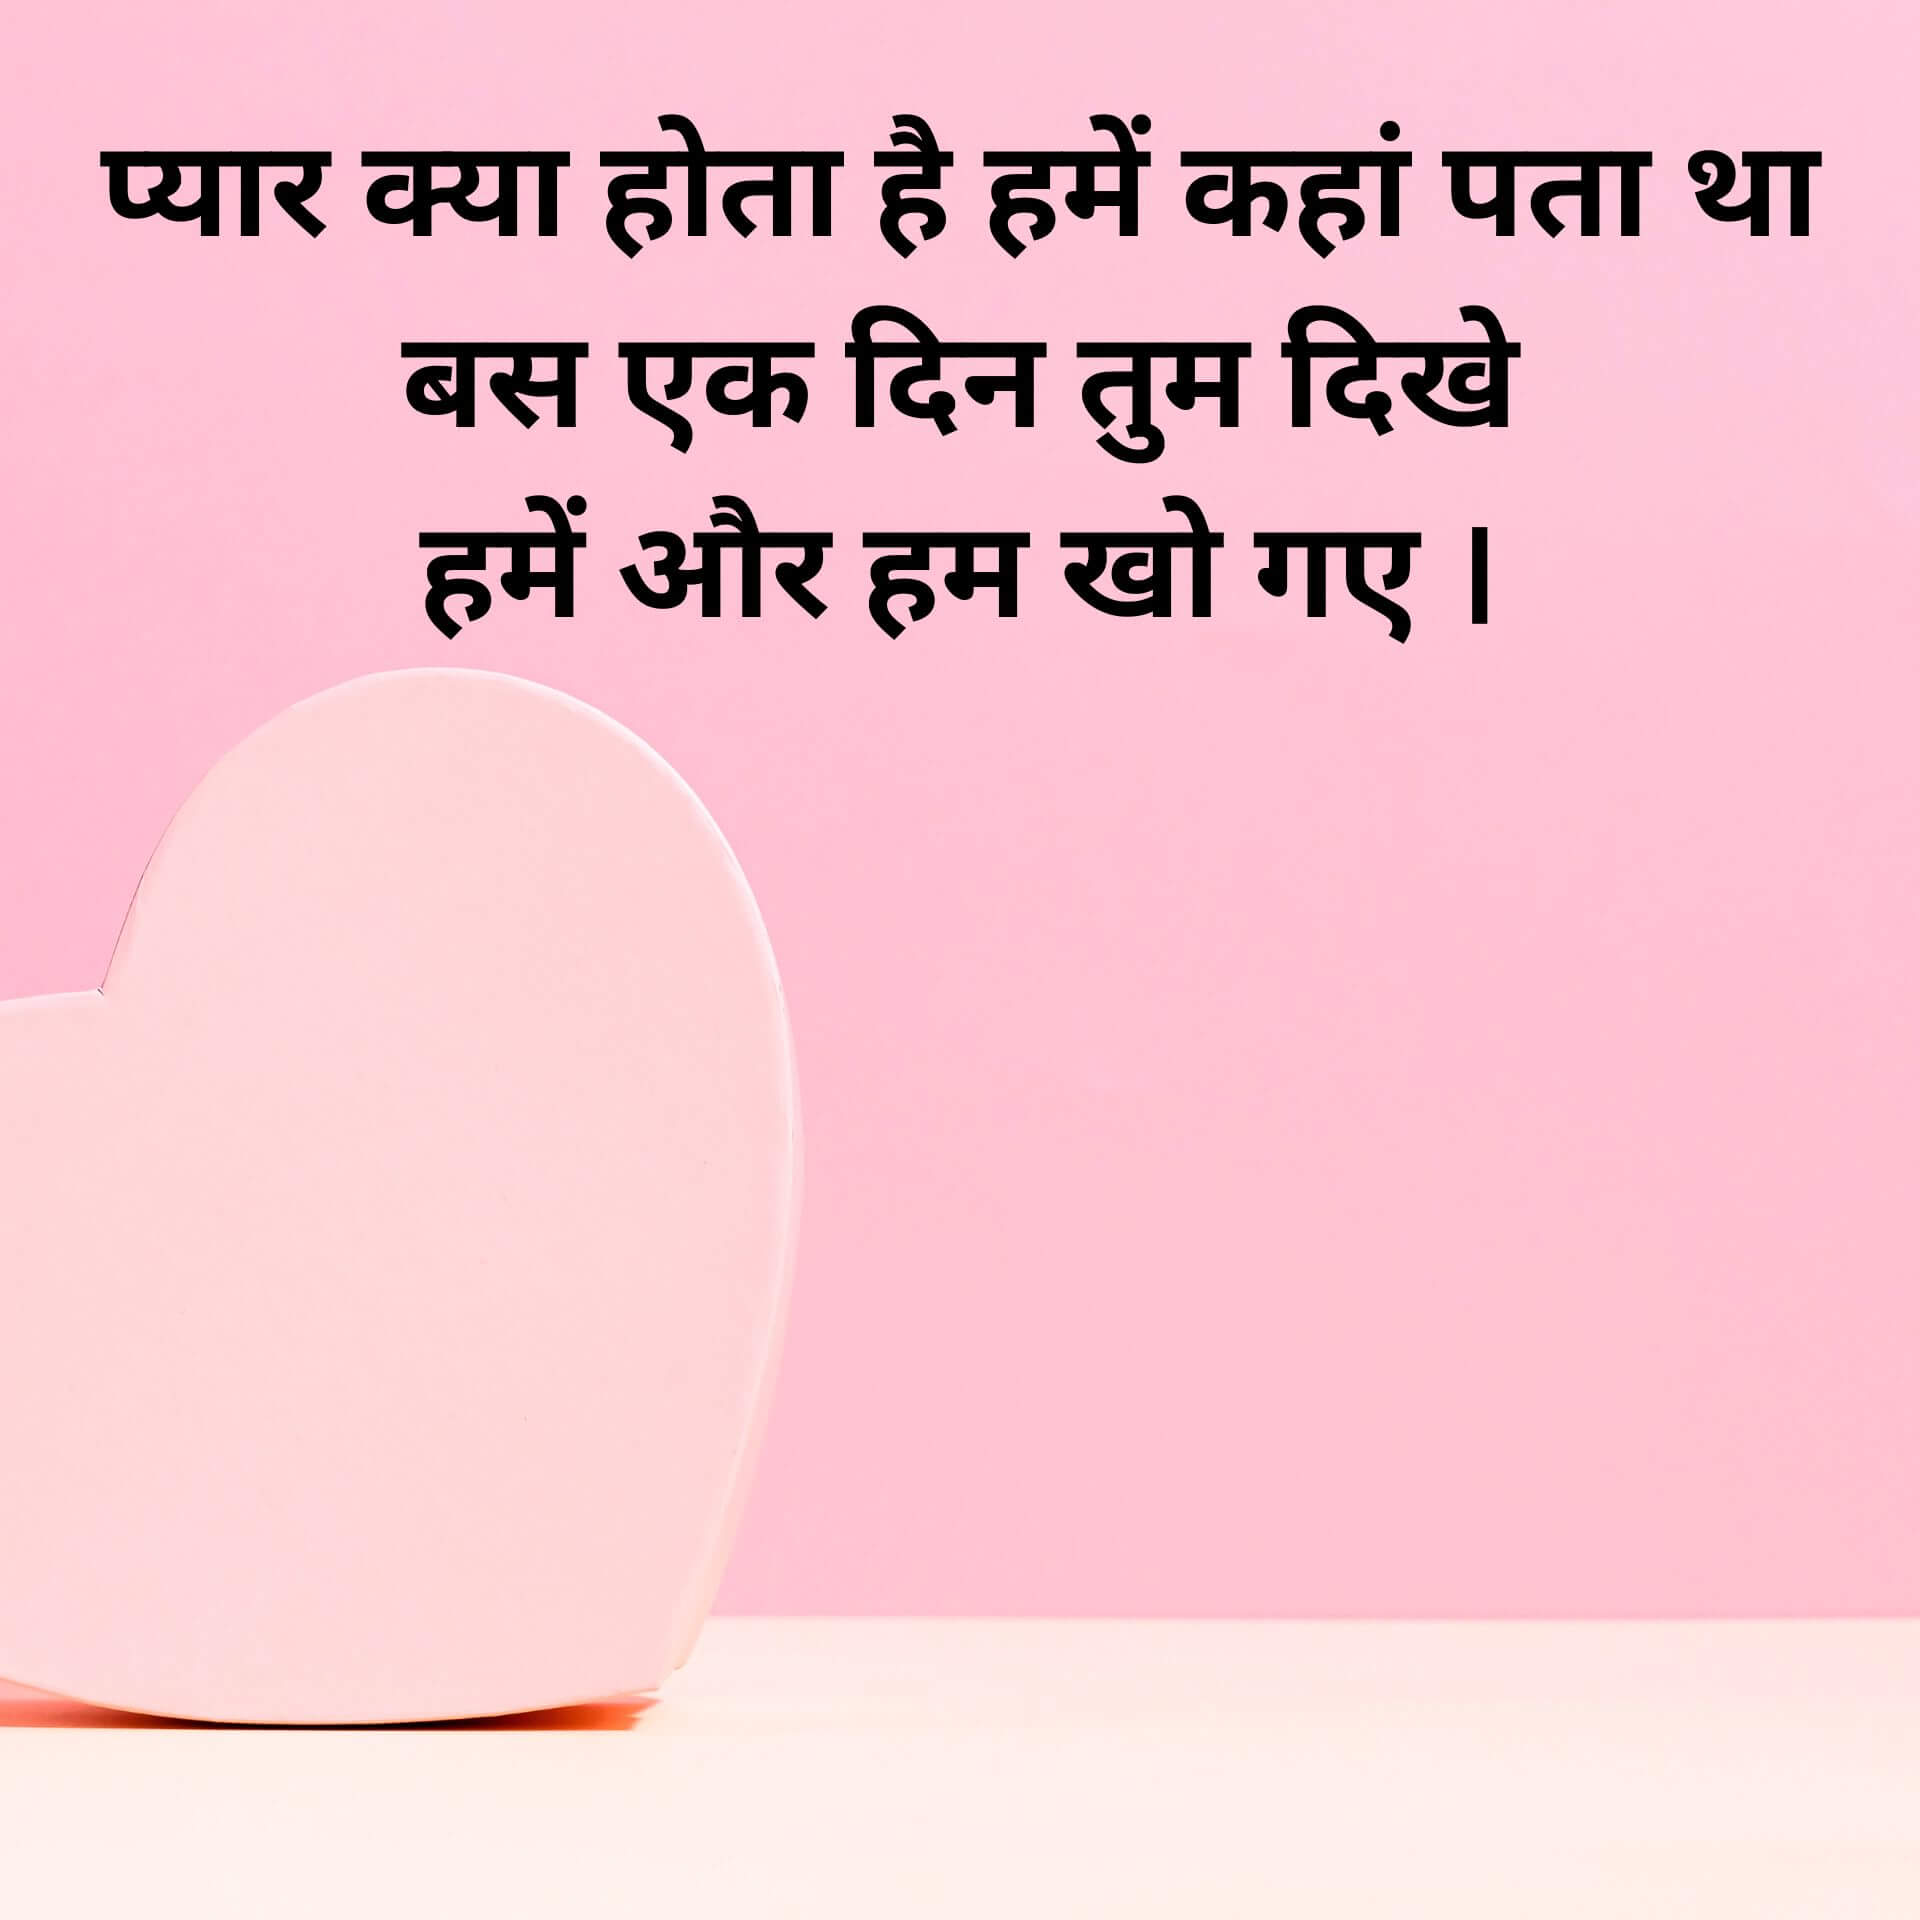 Hindi Quotes Images Download 1